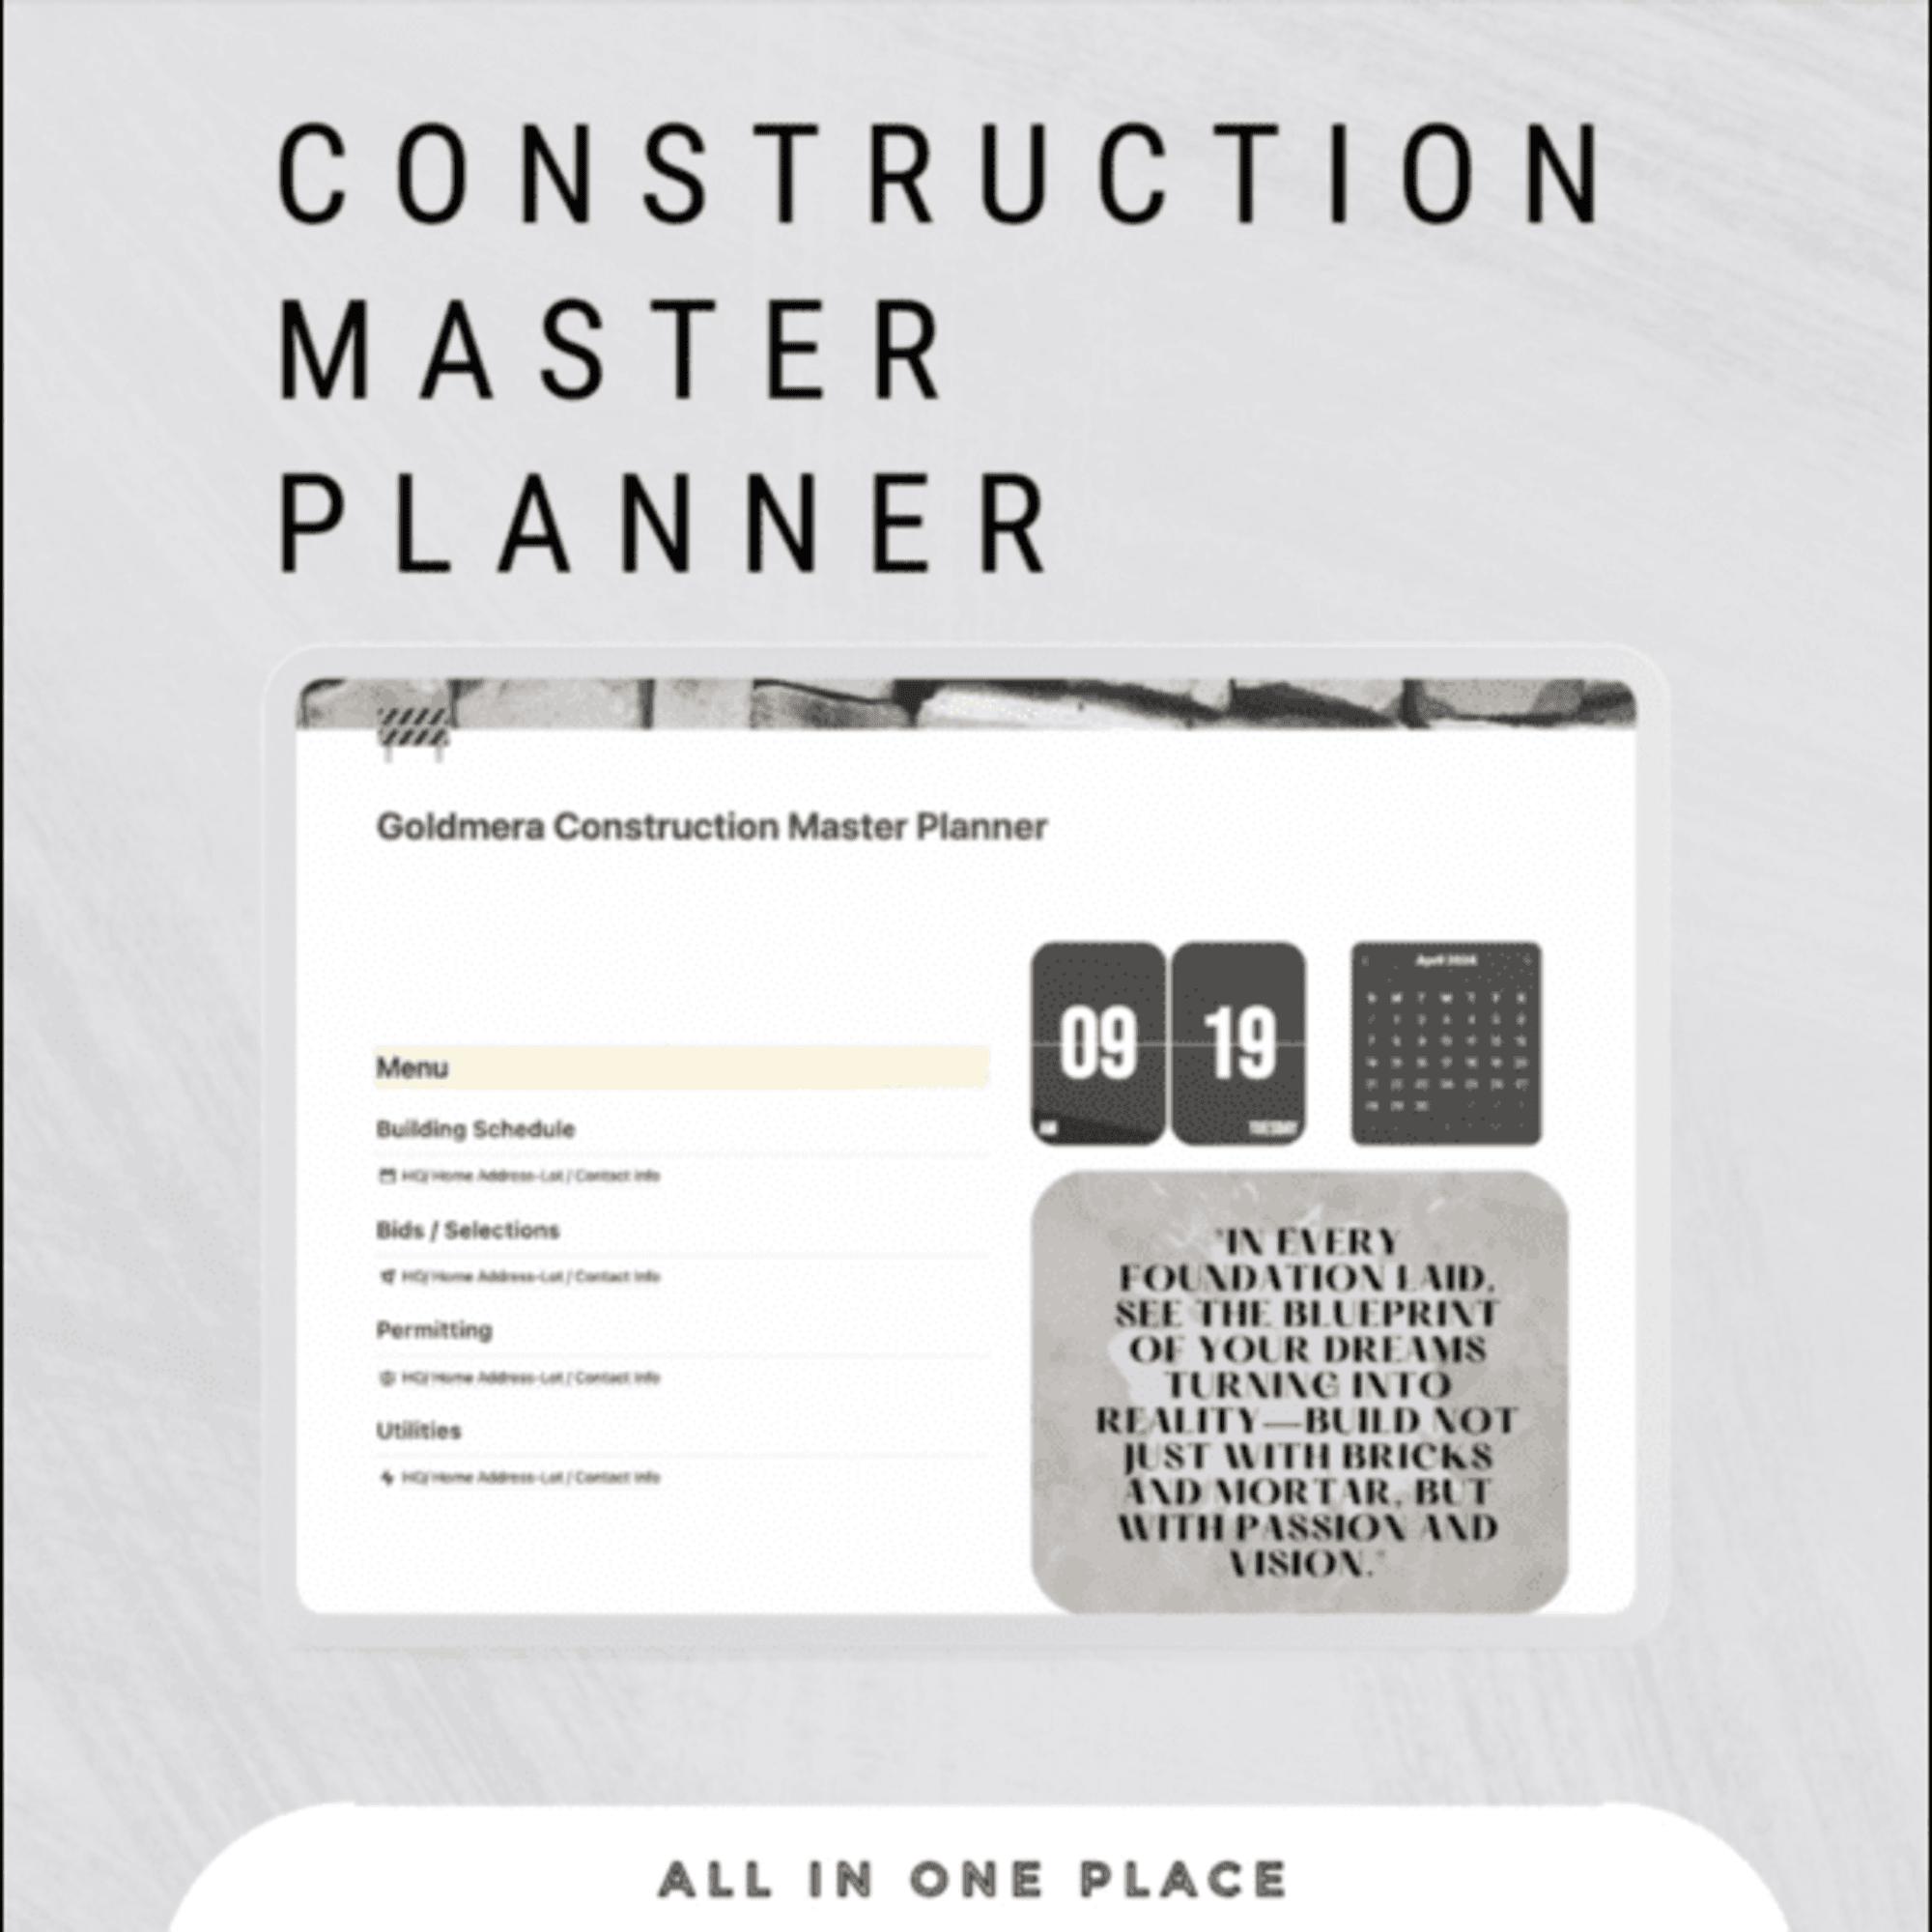 Hey there! 🥳 You've just landed yourself in front of the ultimate Construction Master Planner template. This temple stems from my experience building track homes with Lennar to local luxury homes.